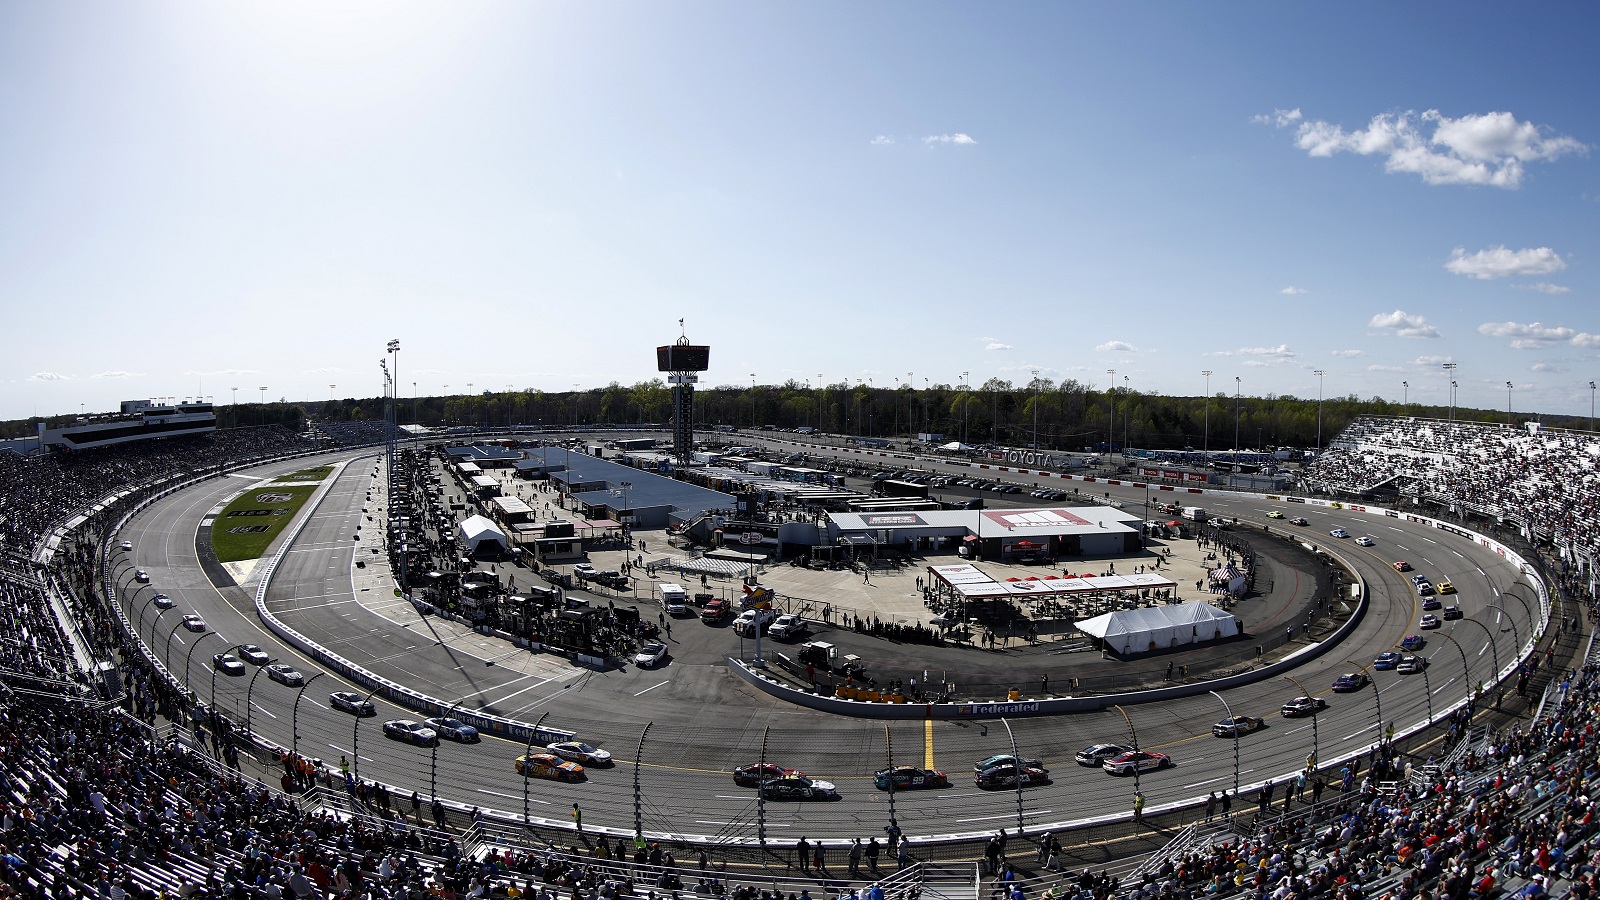 A general view of racing during the NASCAR Cup Series Toyota Owners 400 at Richmond Raceway on April 3, 2022, in Richmond, Virginia. | Jared C. Tilton/Getty Images